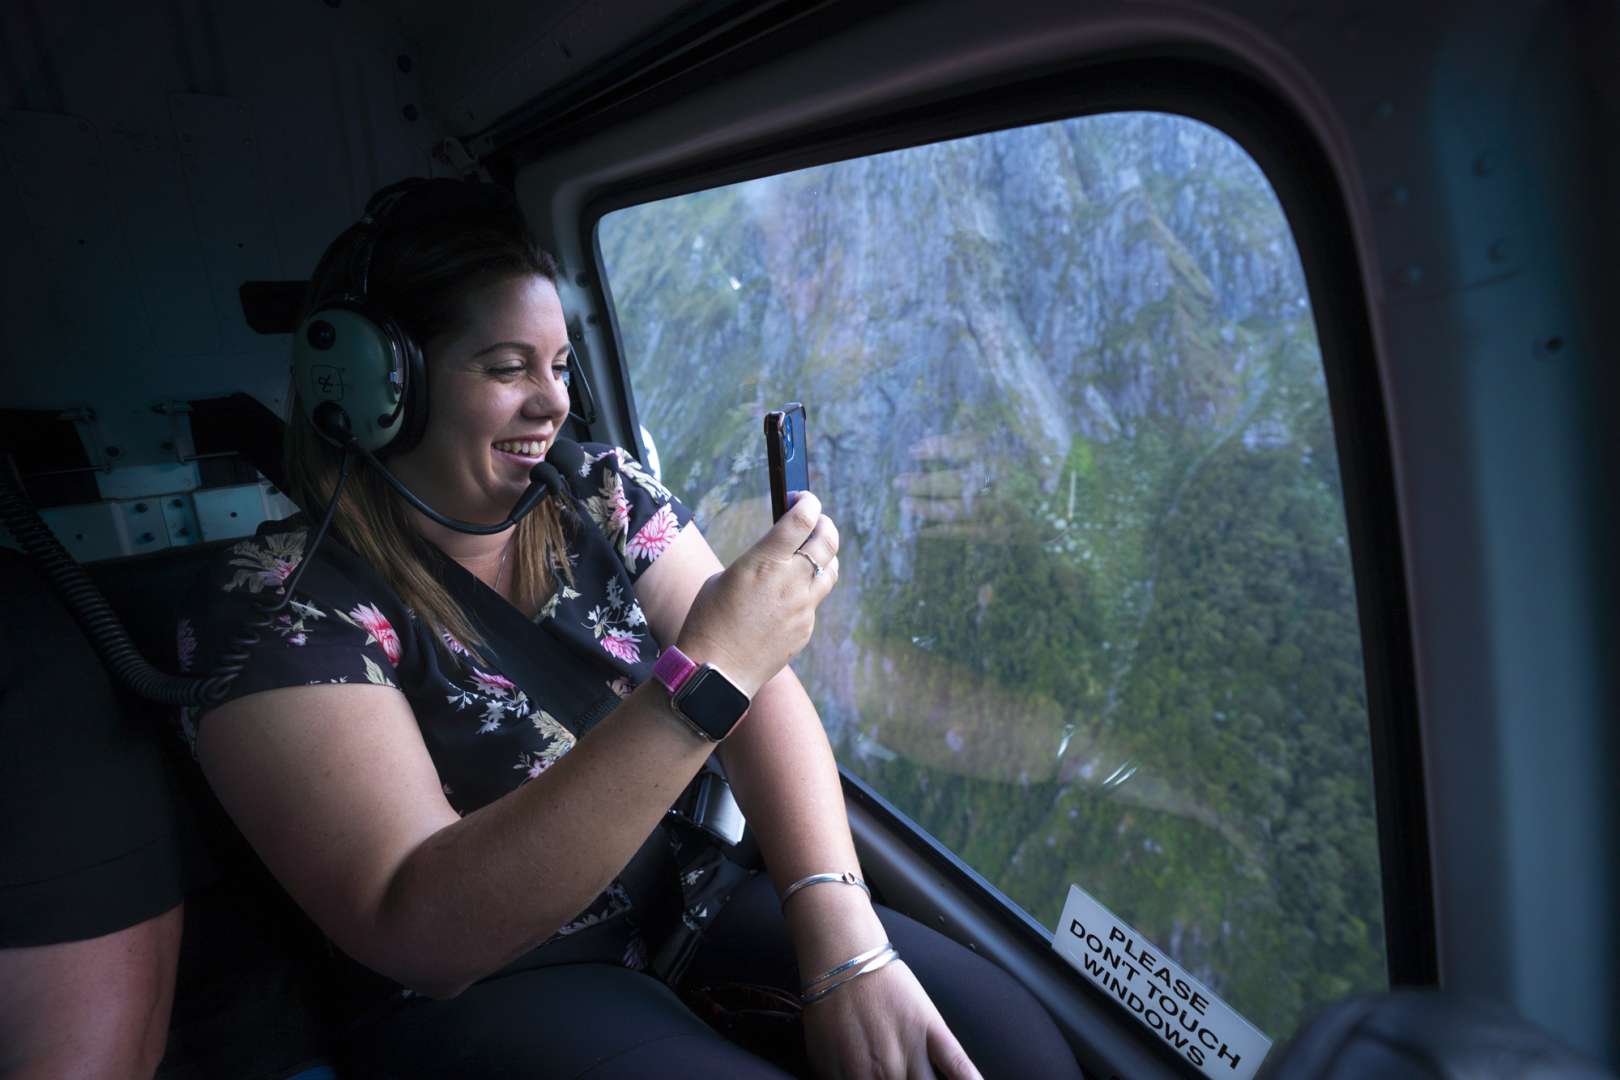 Photos can be taken anywhere along your flight